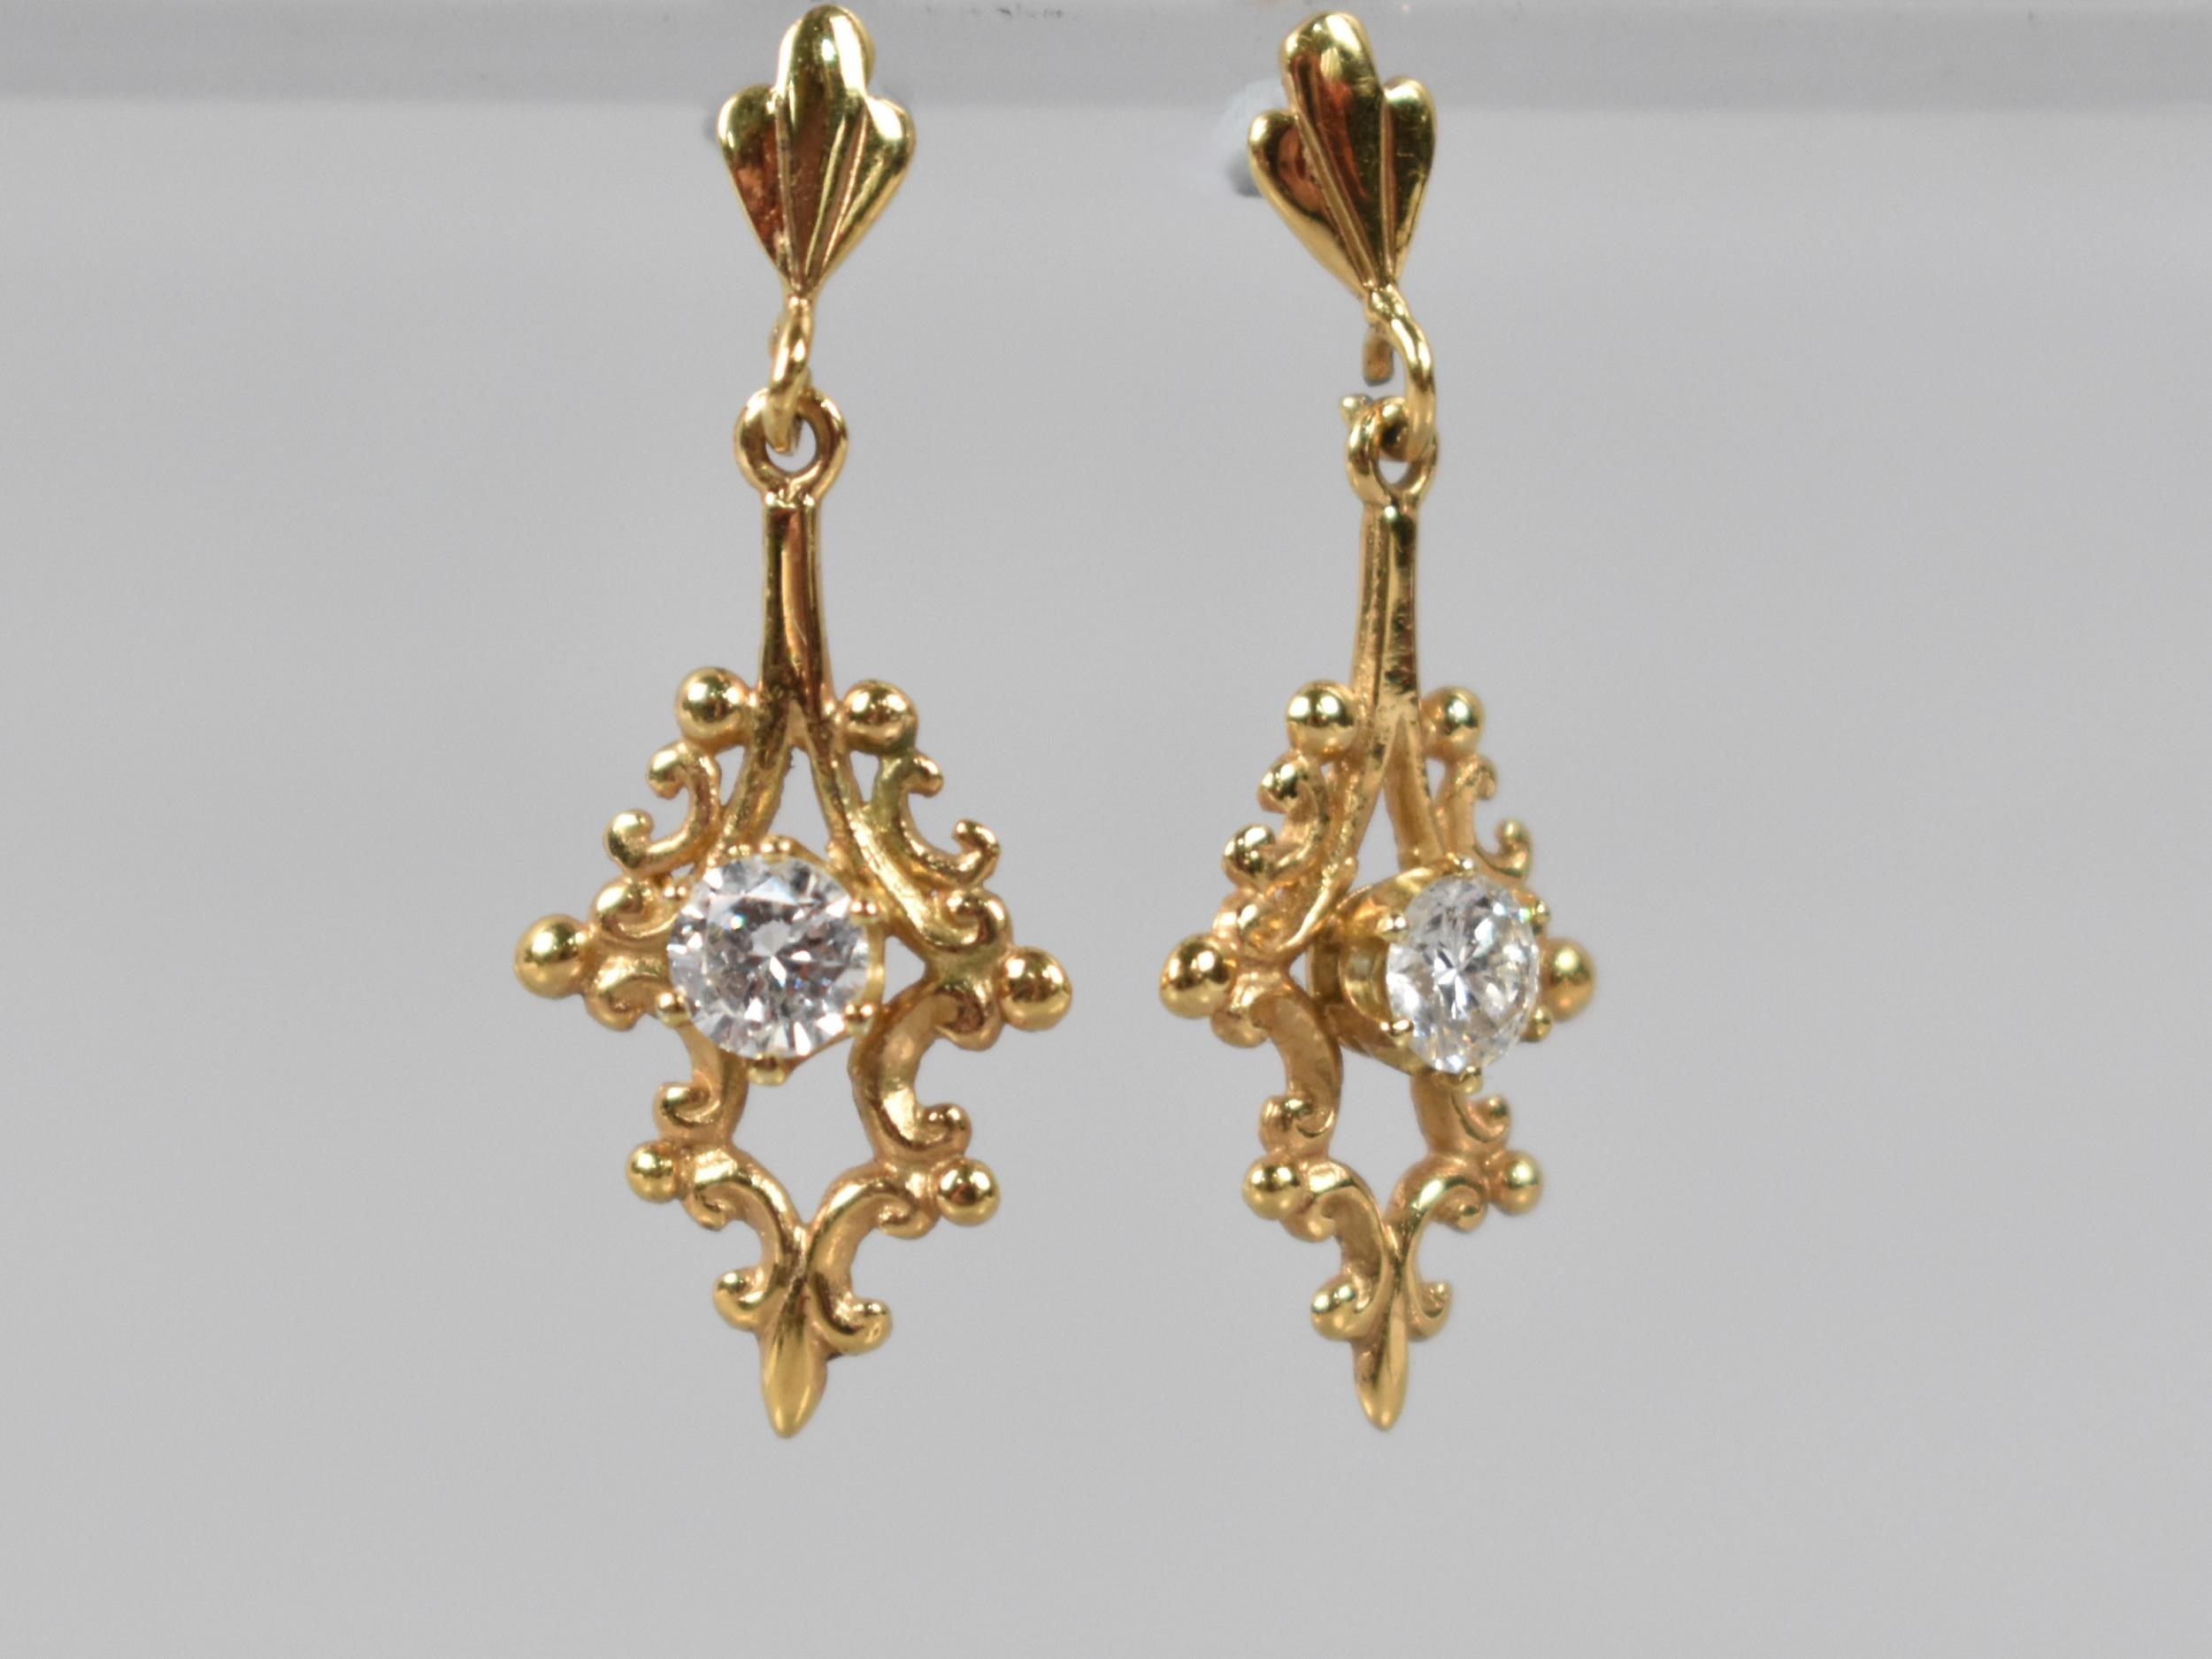 A Pair of Diamond Mounted 9ct Gold Drop Earrings, Central Round Cut Stone Measuring 4.1mm Diameter - Image 2 of 3